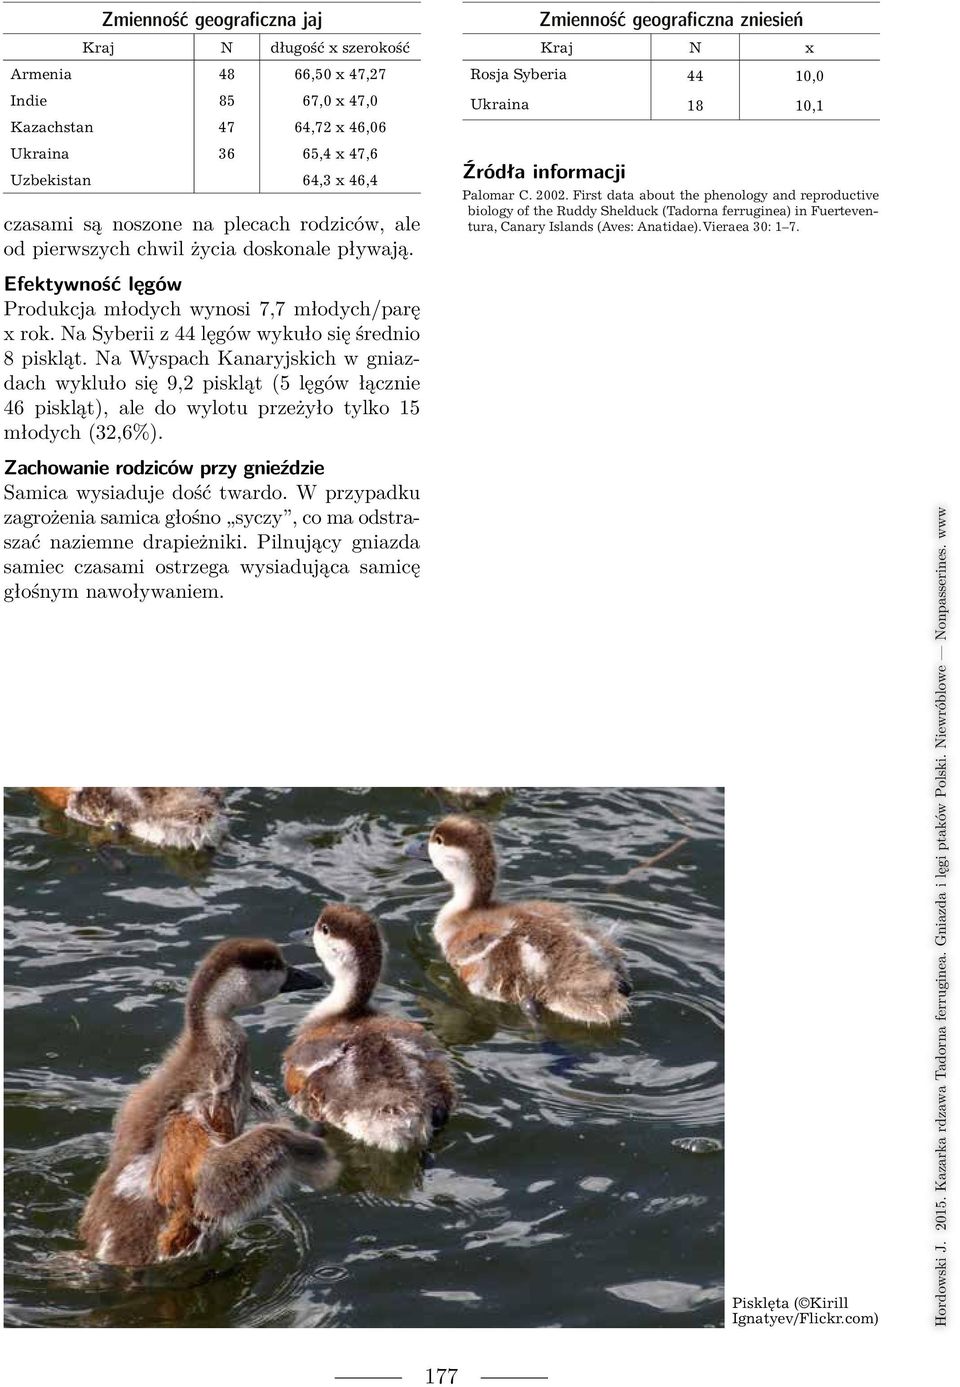 First data about the phenology and reproductive biology of the Ruddy Shelduck (Tadorna ferruginea) in Fuerteventura, Canary Islands (Aves: Anatidae). Vieraea 30: 1 7.